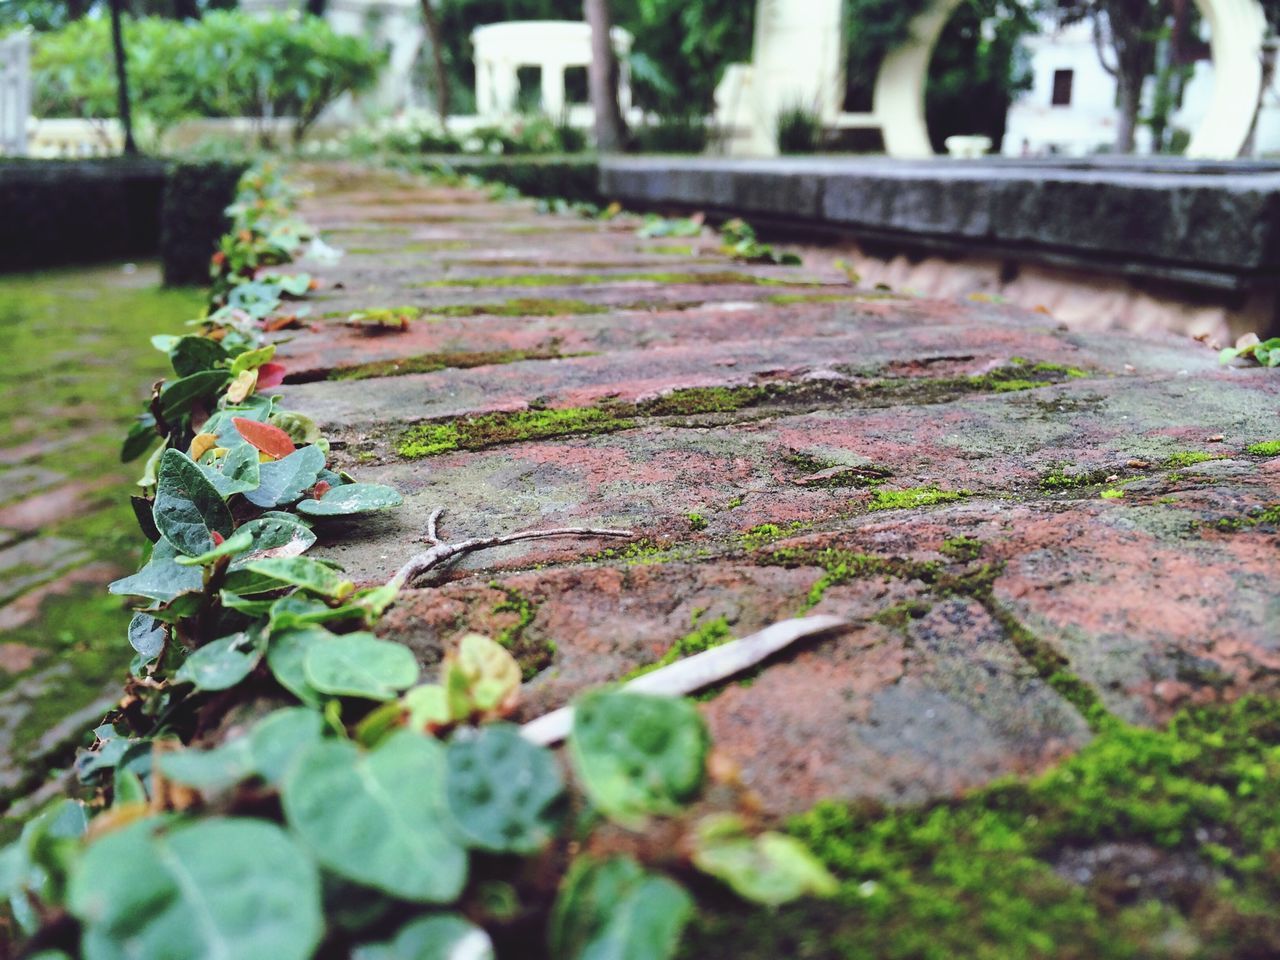 selective focus, focus on foreground, leaf, close-up, plant, surface level, growth, nature, day, wood - material, green color, outdoors, moss, no people, built structure, steps, fallen, textured, leaves, footpath